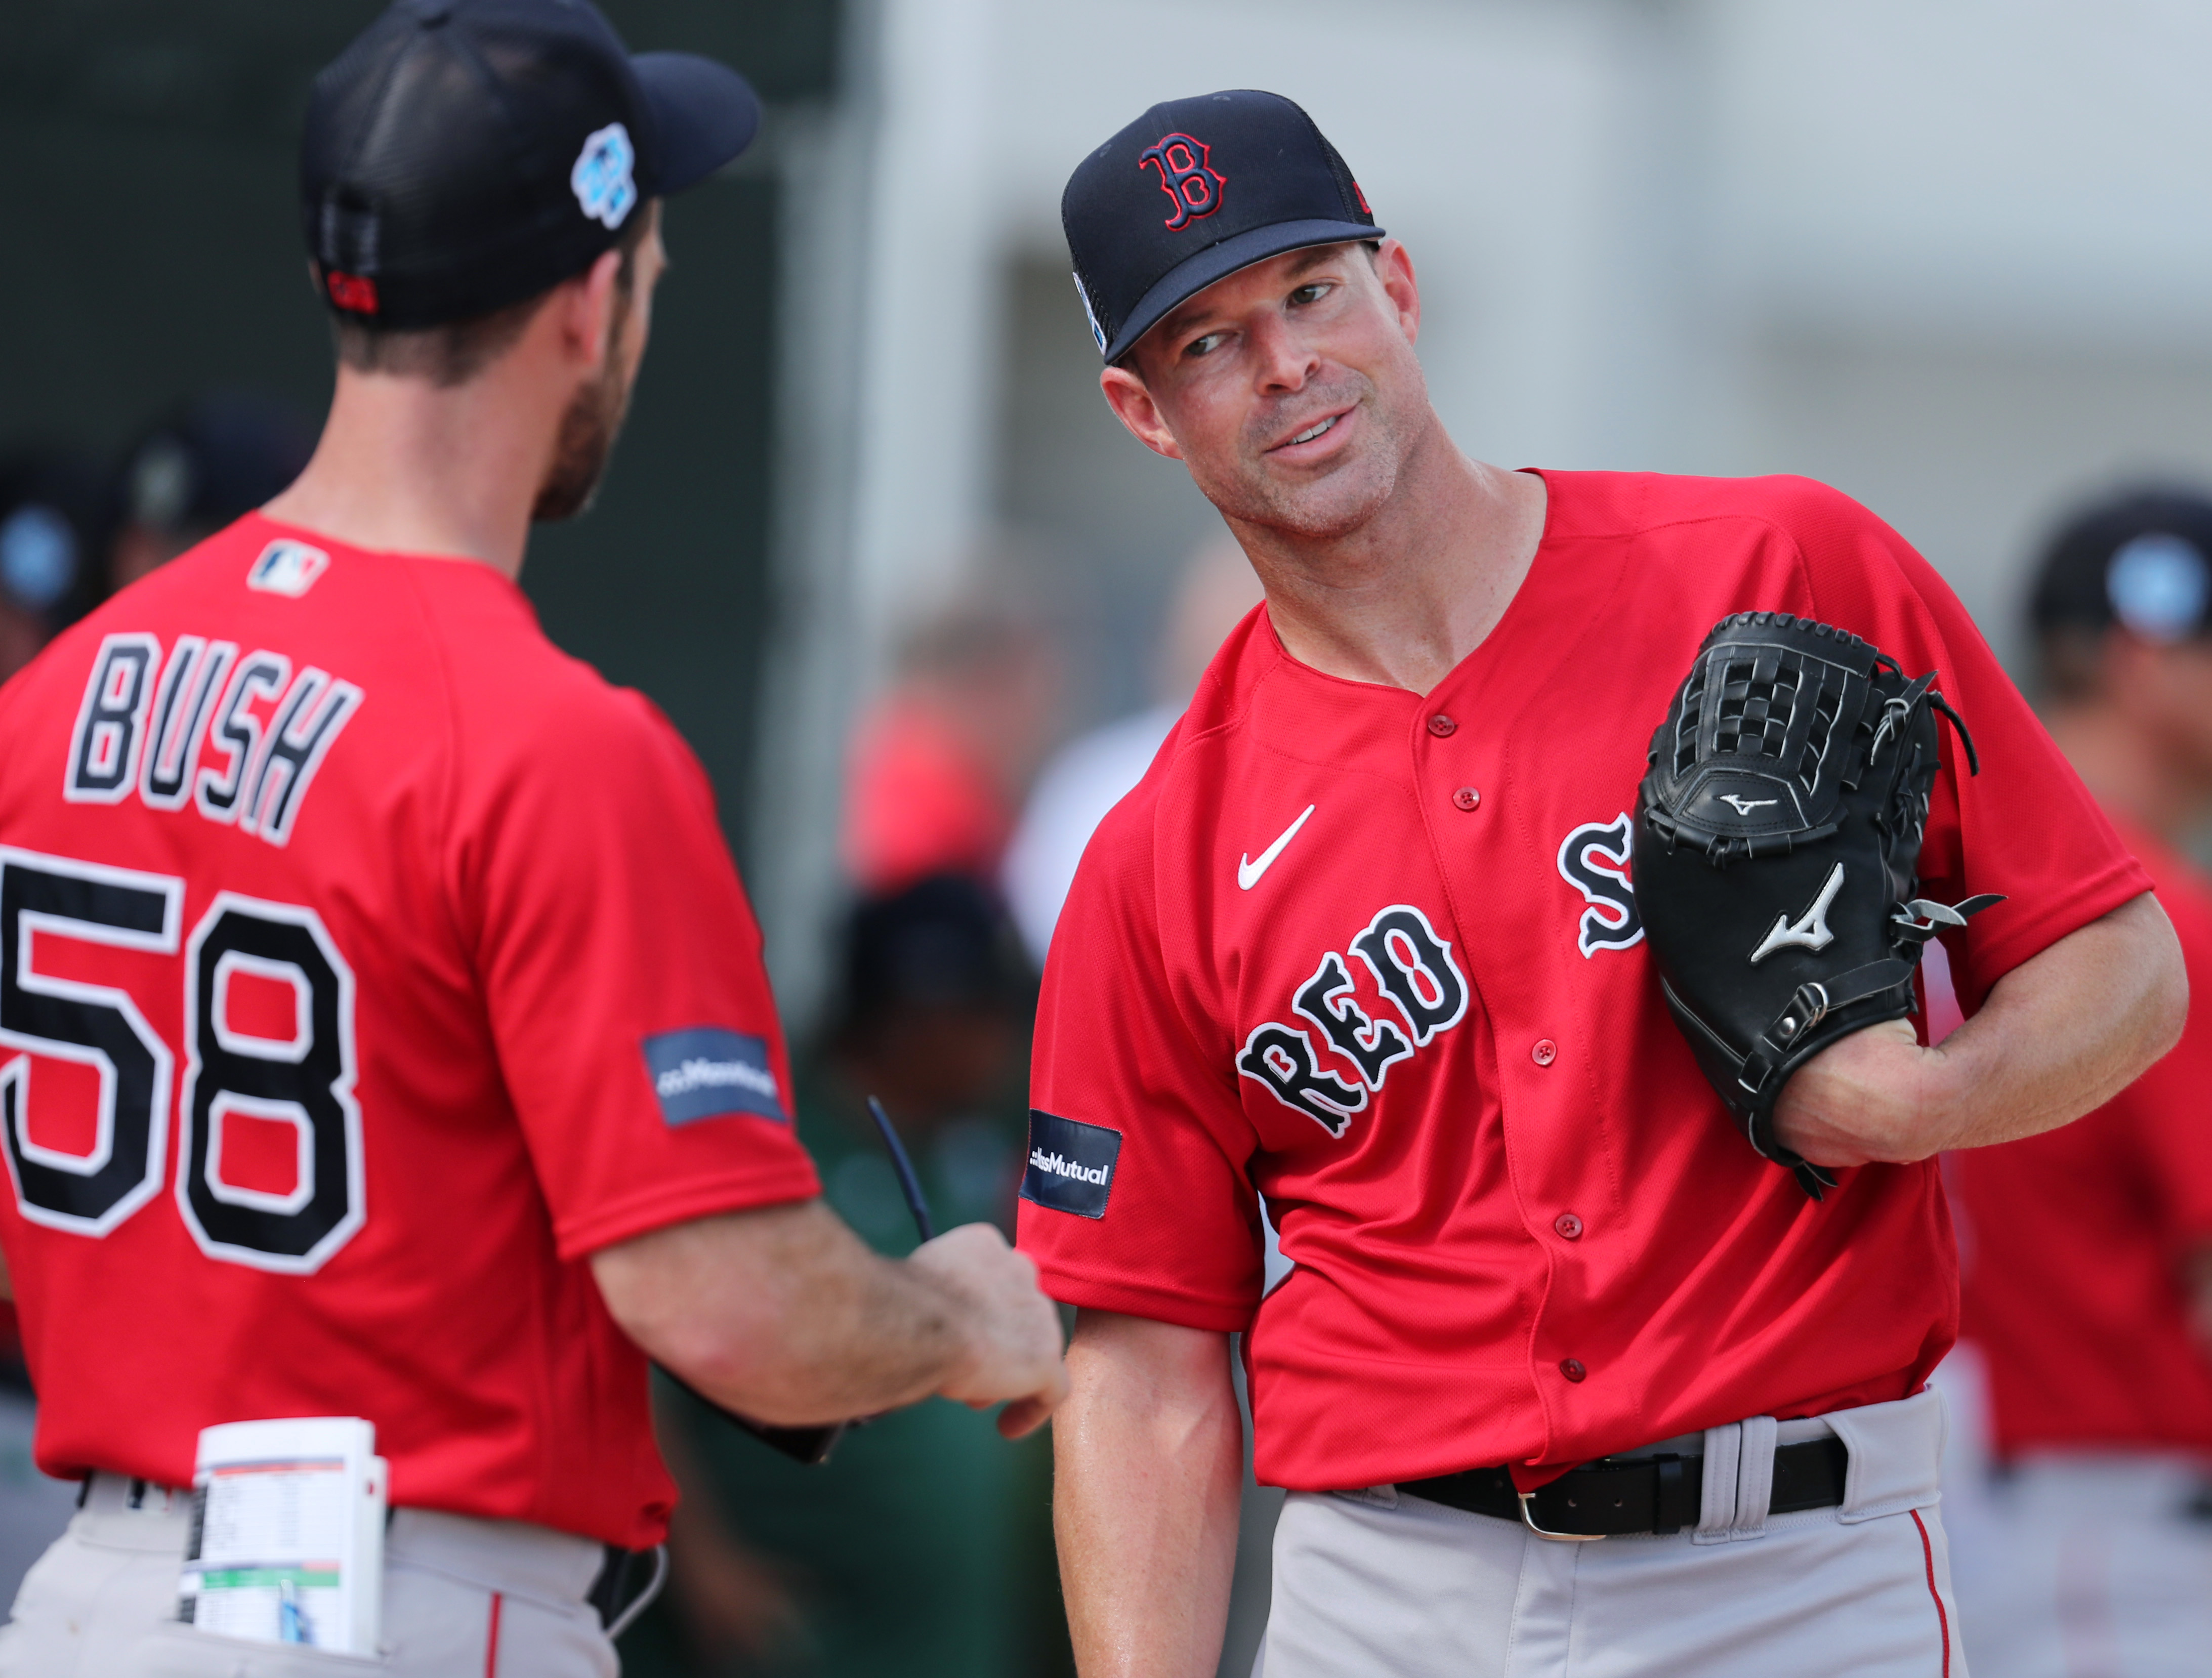 Salem Red Sox to host Father's Day Catch